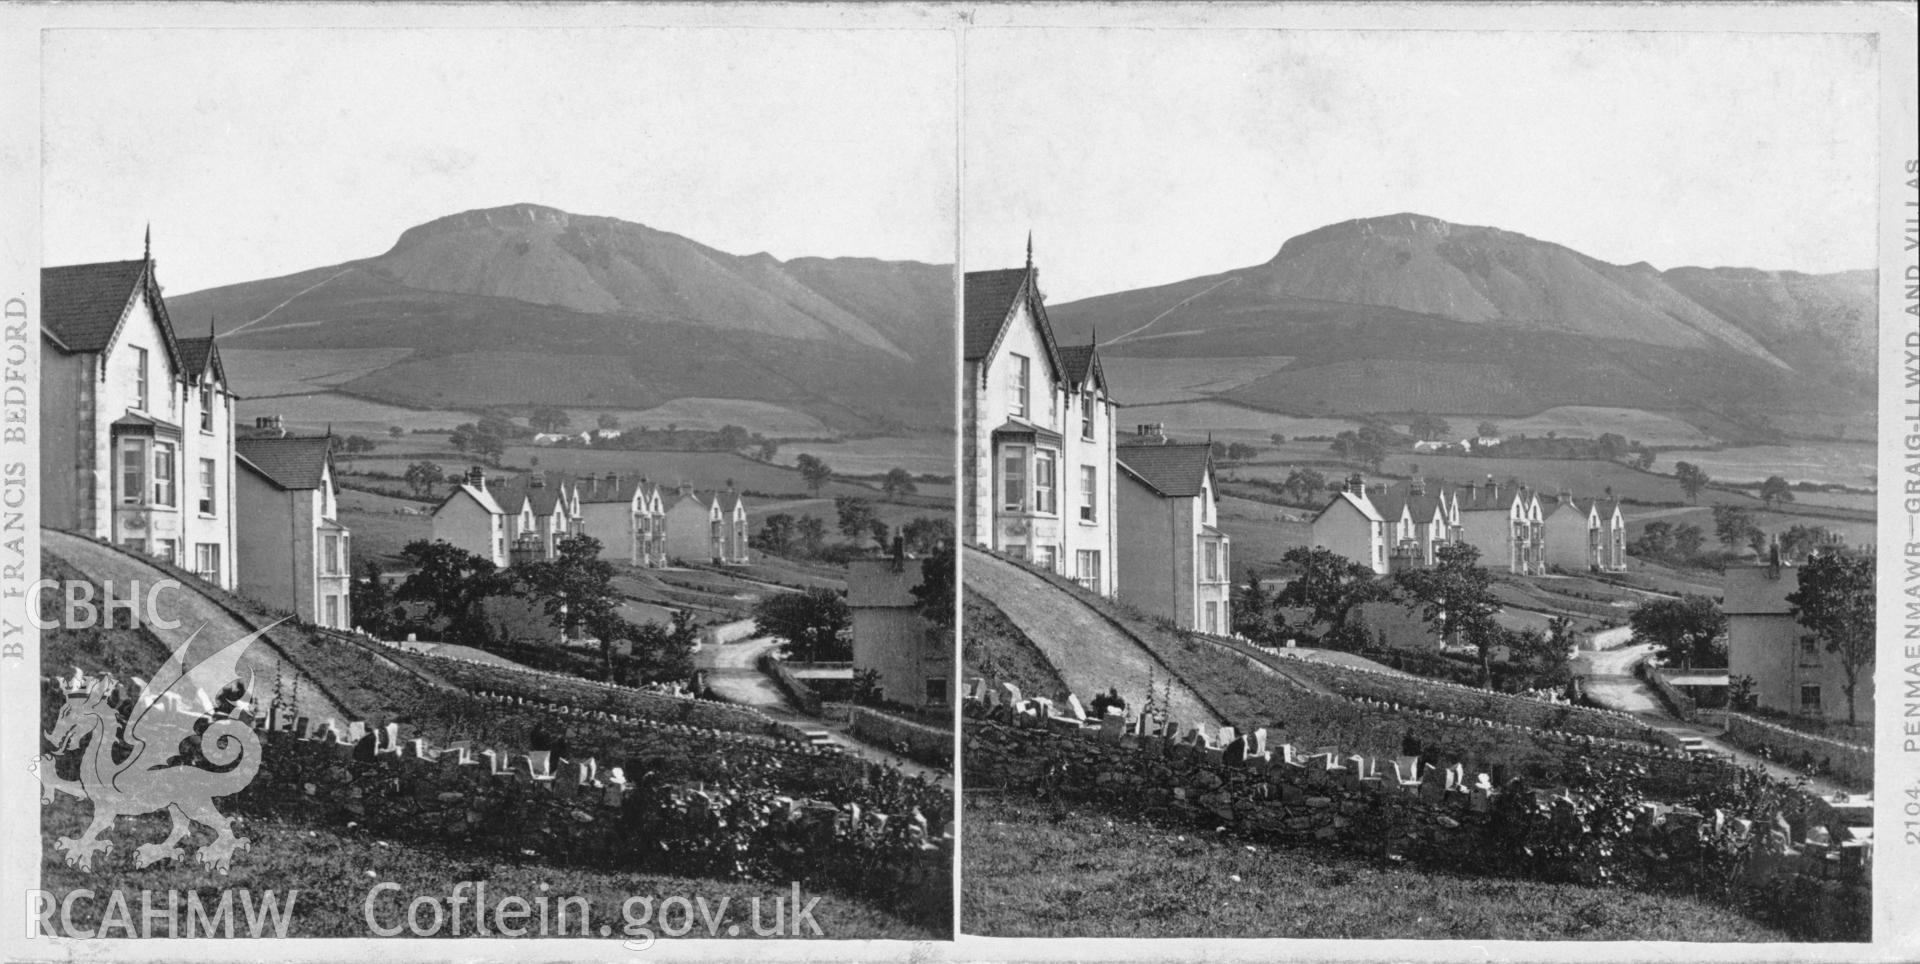 Black and white photograph of Penmaenmawr, copied from an original postcard in the possession of Thomas Lloyd. Negative held.